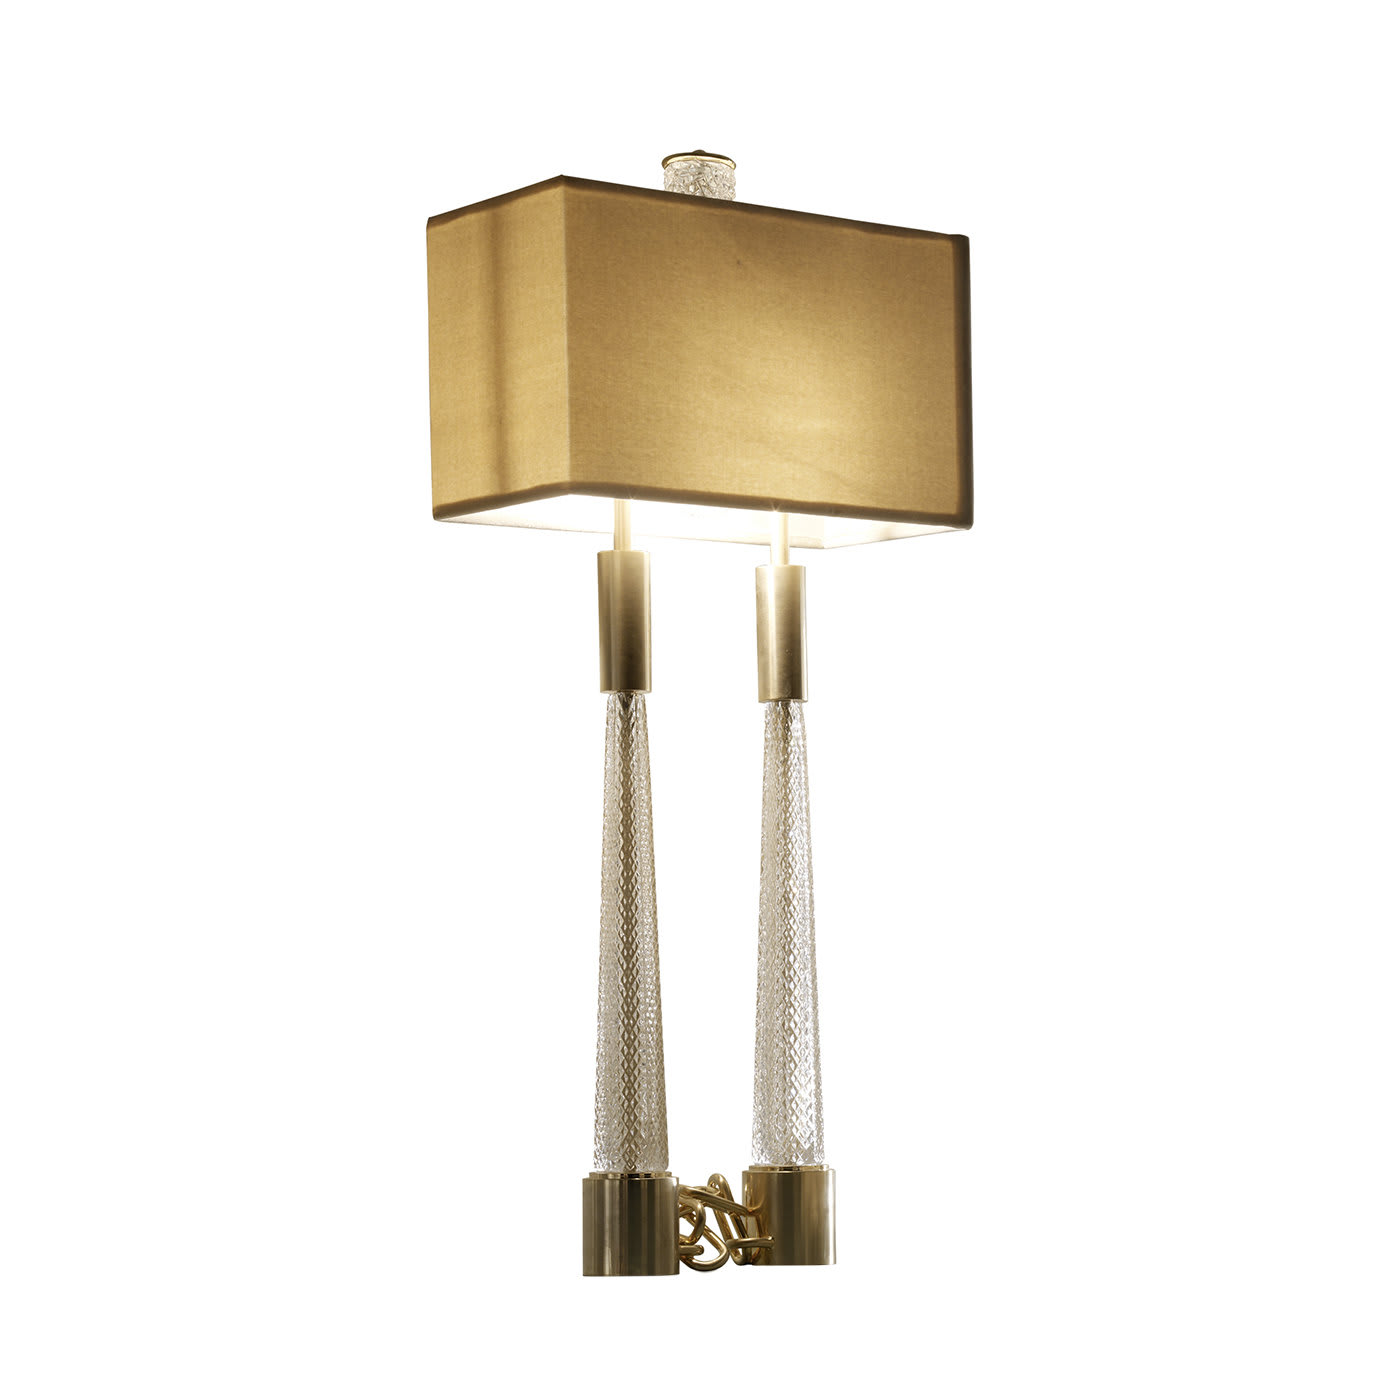 CL2028 Table Lamp - Sigma L2